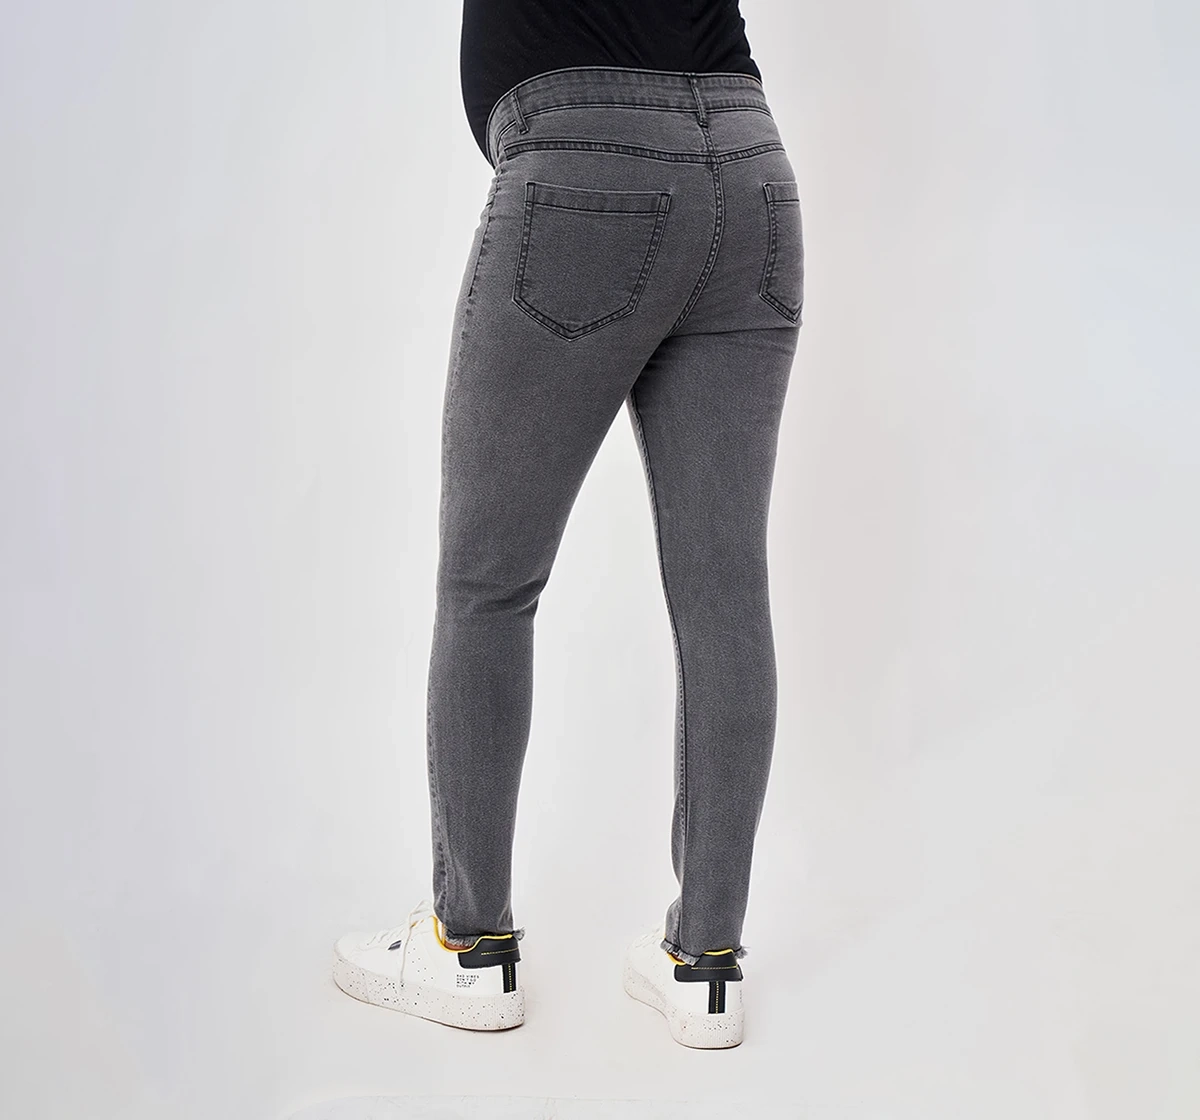 Black maternity jeans • Compare & see prices now »